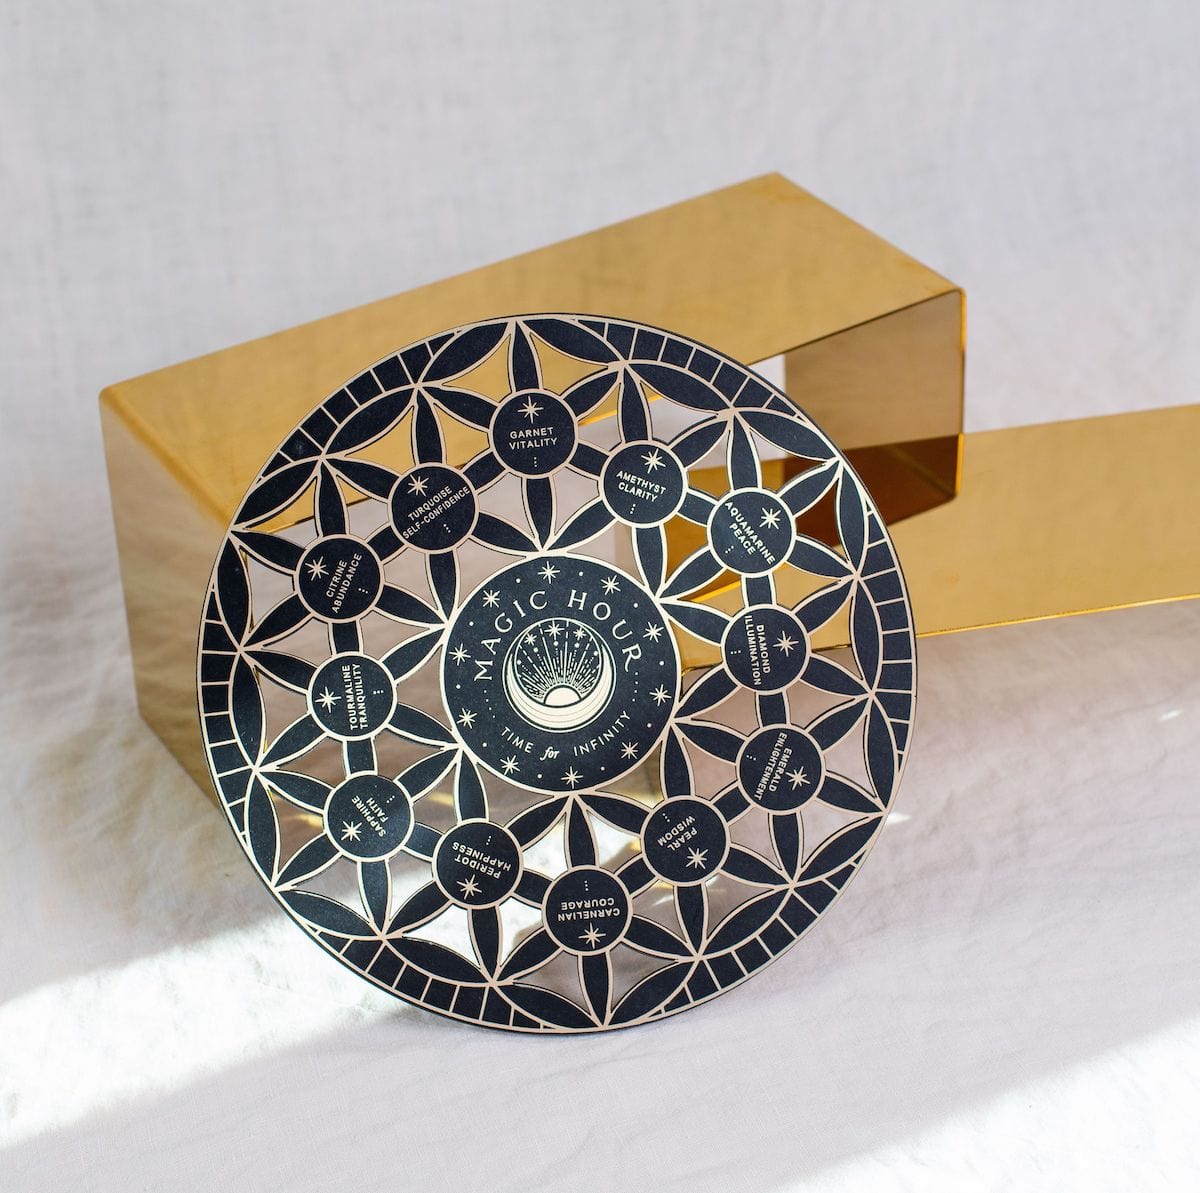 A round black and silver decorative plate with intricate geometric patterns and text &quot;Crystal Grid: Flower of Life Tea Ceremony Altar&quot; at the center, surrounded by smaller circles with text like &quot;gratitude,&quot; &quot;immunity,&quot; and &quot;healing.&quot; The plate is set against a white cloth backdrop, next to a golden rectangular object.